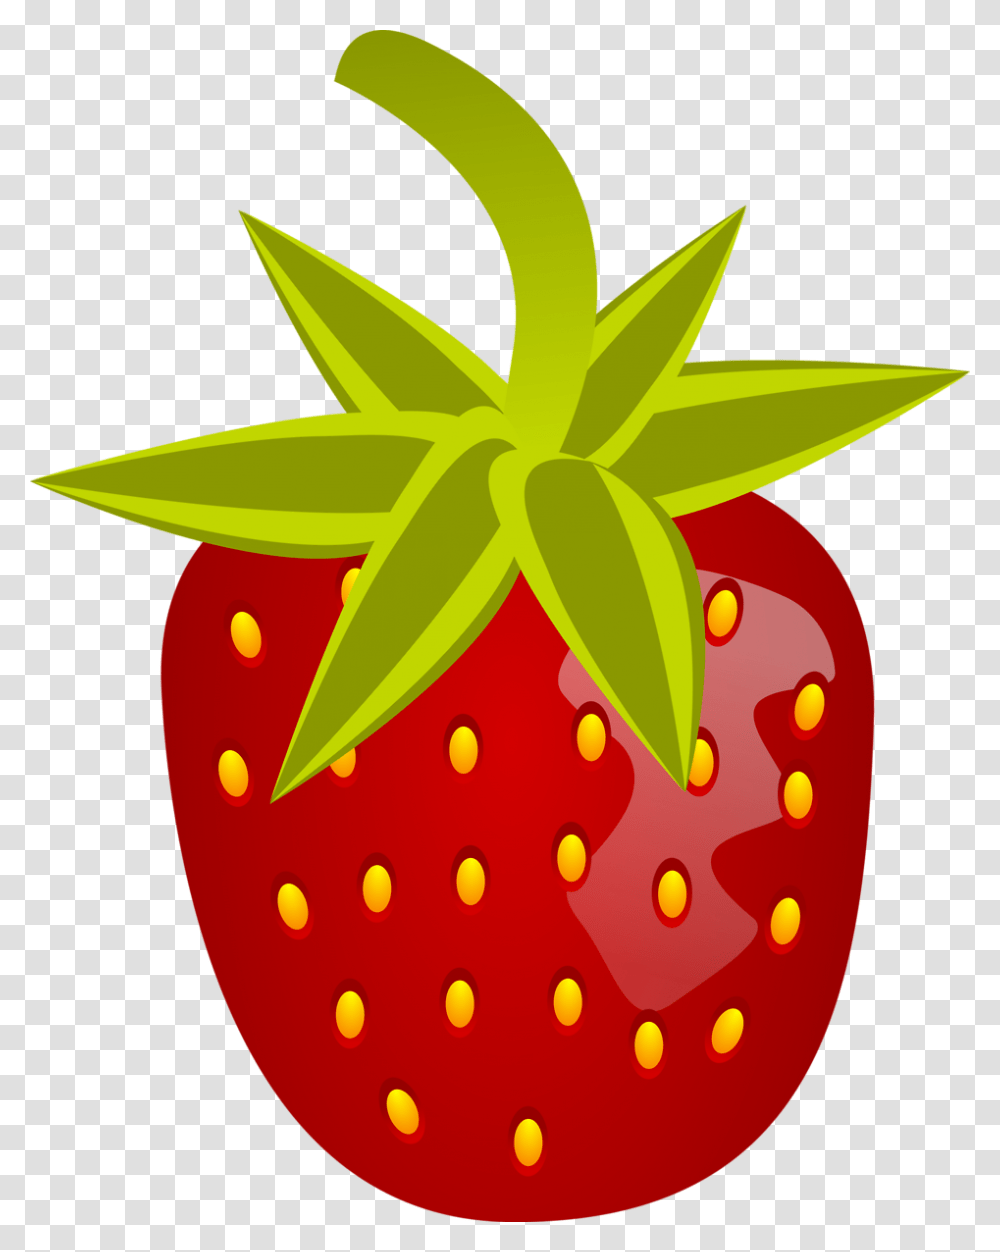 Strawberry Free Stock Photo Illustration Of A Strawberry, Fruit, Plant Transparent Png